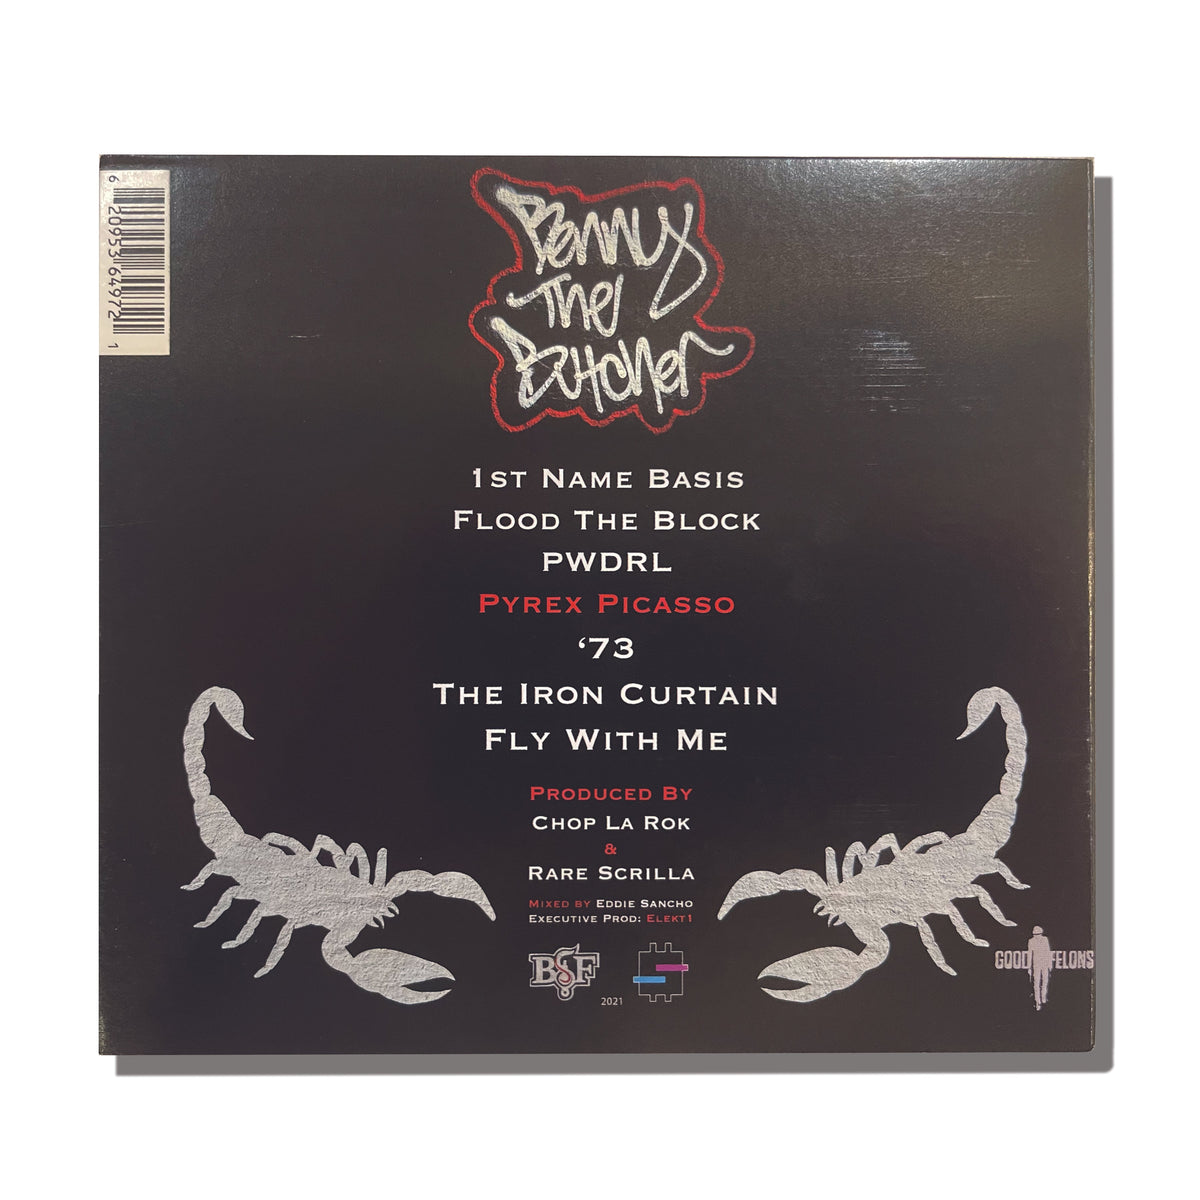 Benny The Butcher - Pyrex Picasso Limited Edition CD